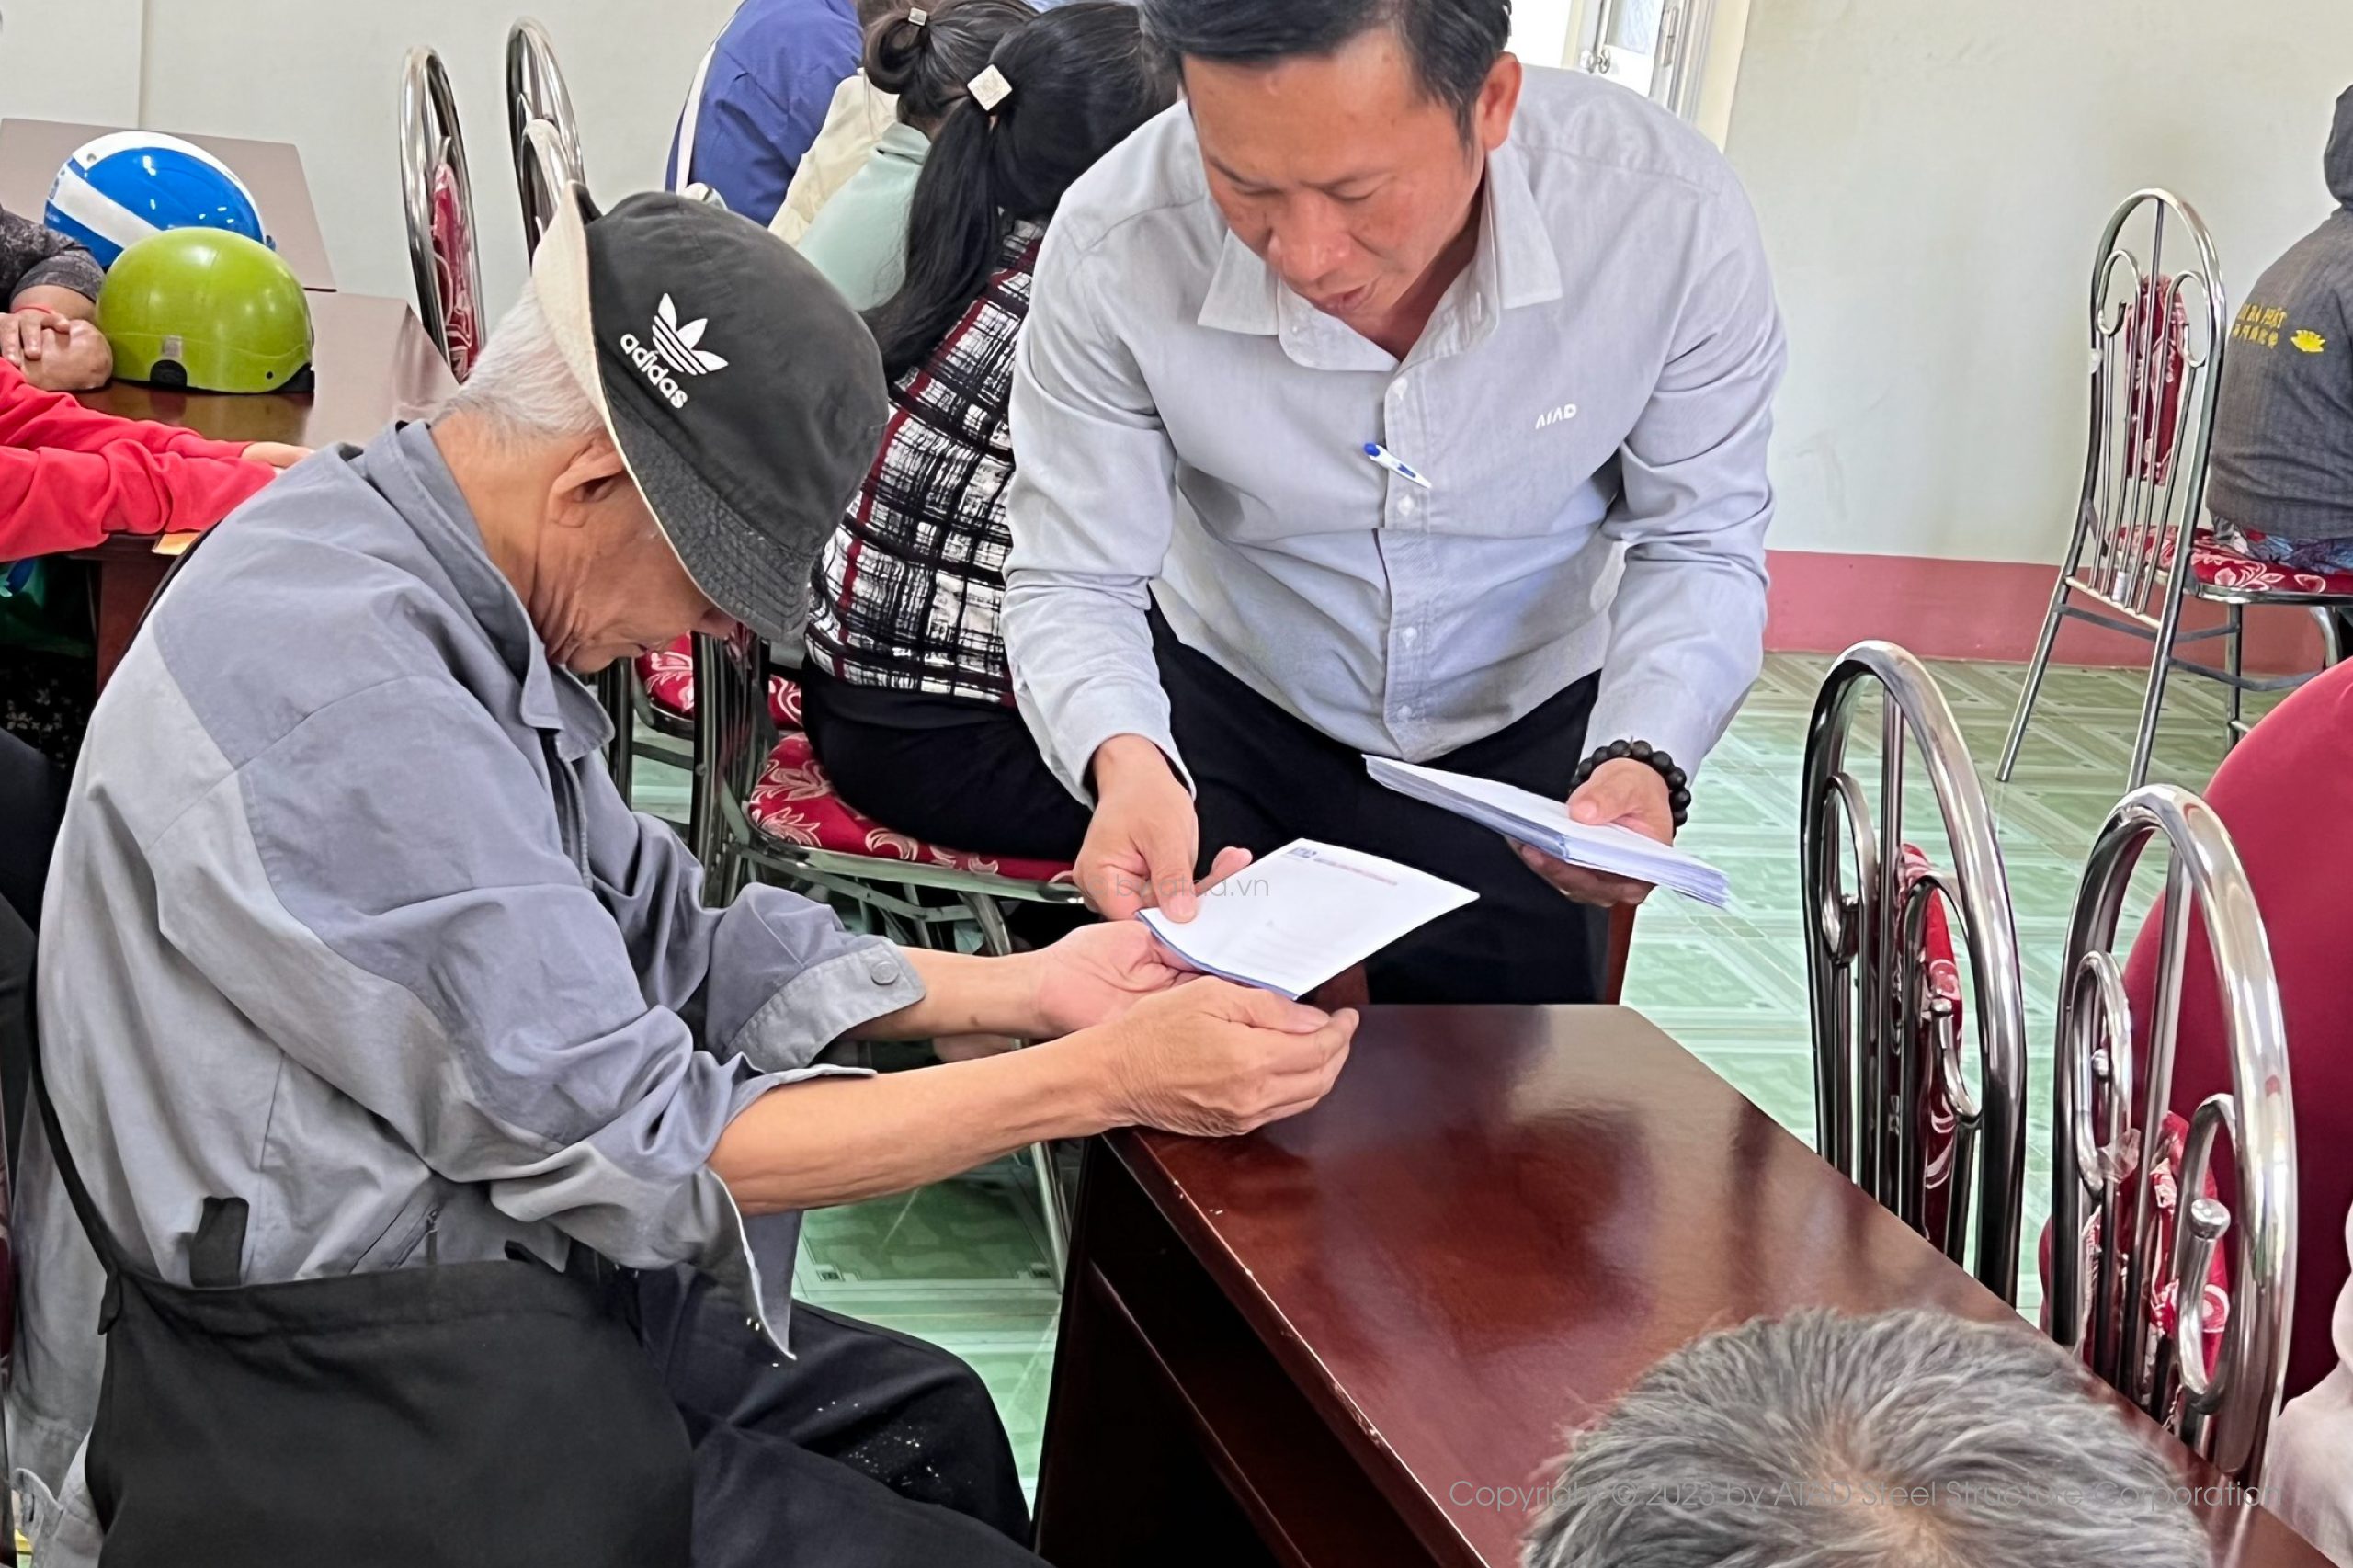 ATAD Presented “Tet” Gifts to The Blind People's Association of Long Khanh City, Dong Nai Province